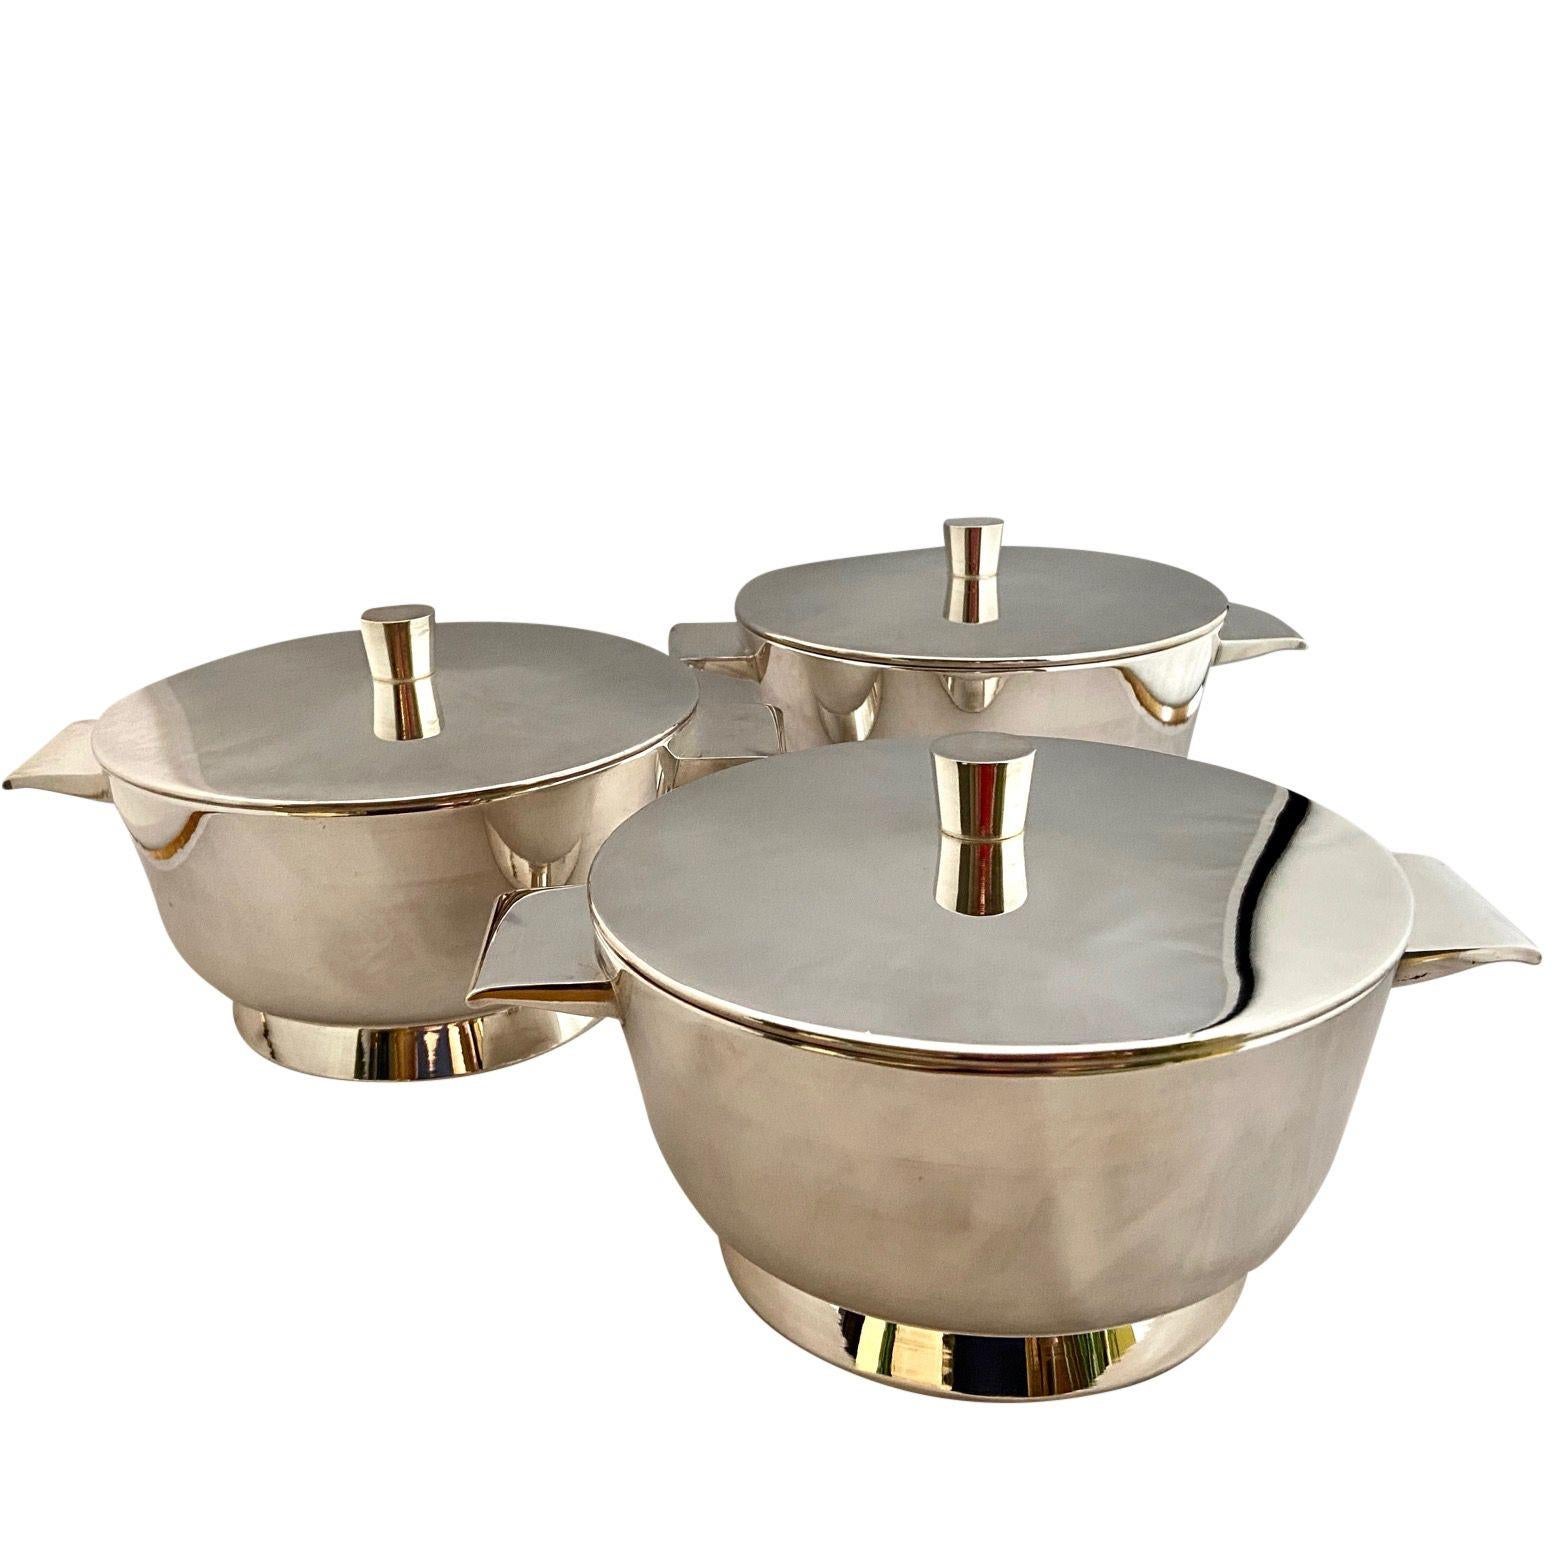 3 x unused vintage Gio Ponti silver plated high serving tureens for Arthur Krupp, designed for the VI Triennale, 100cl each + 1 used ladle (condition fair)
These are a lovely size and in superb condition, I doubt they have ever been used. Provenance